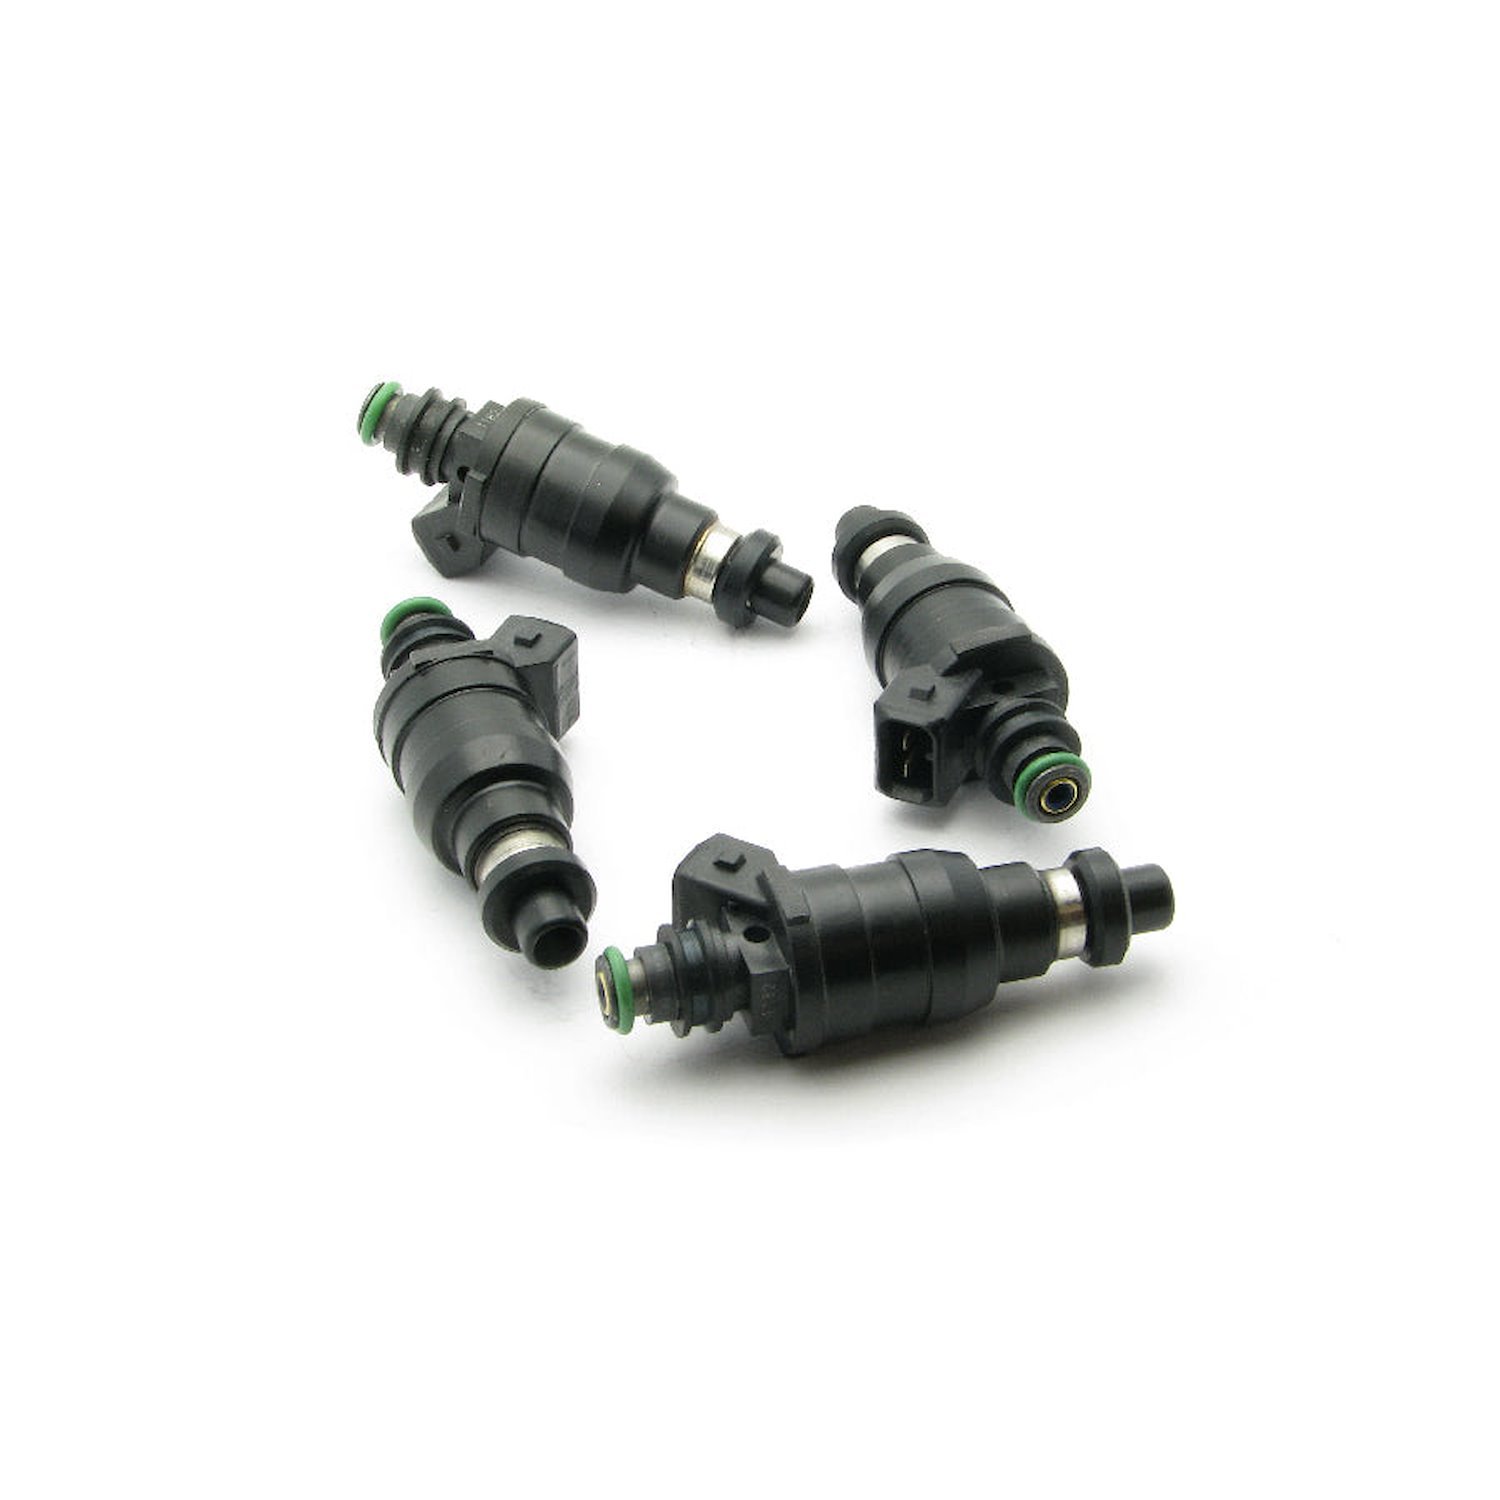 42M0208004  800cc Low Impedance Injectors for Mitsubishi Eclipse (DSM) 4G63T 95-99 and EVO 8/9 4G63T 03-06